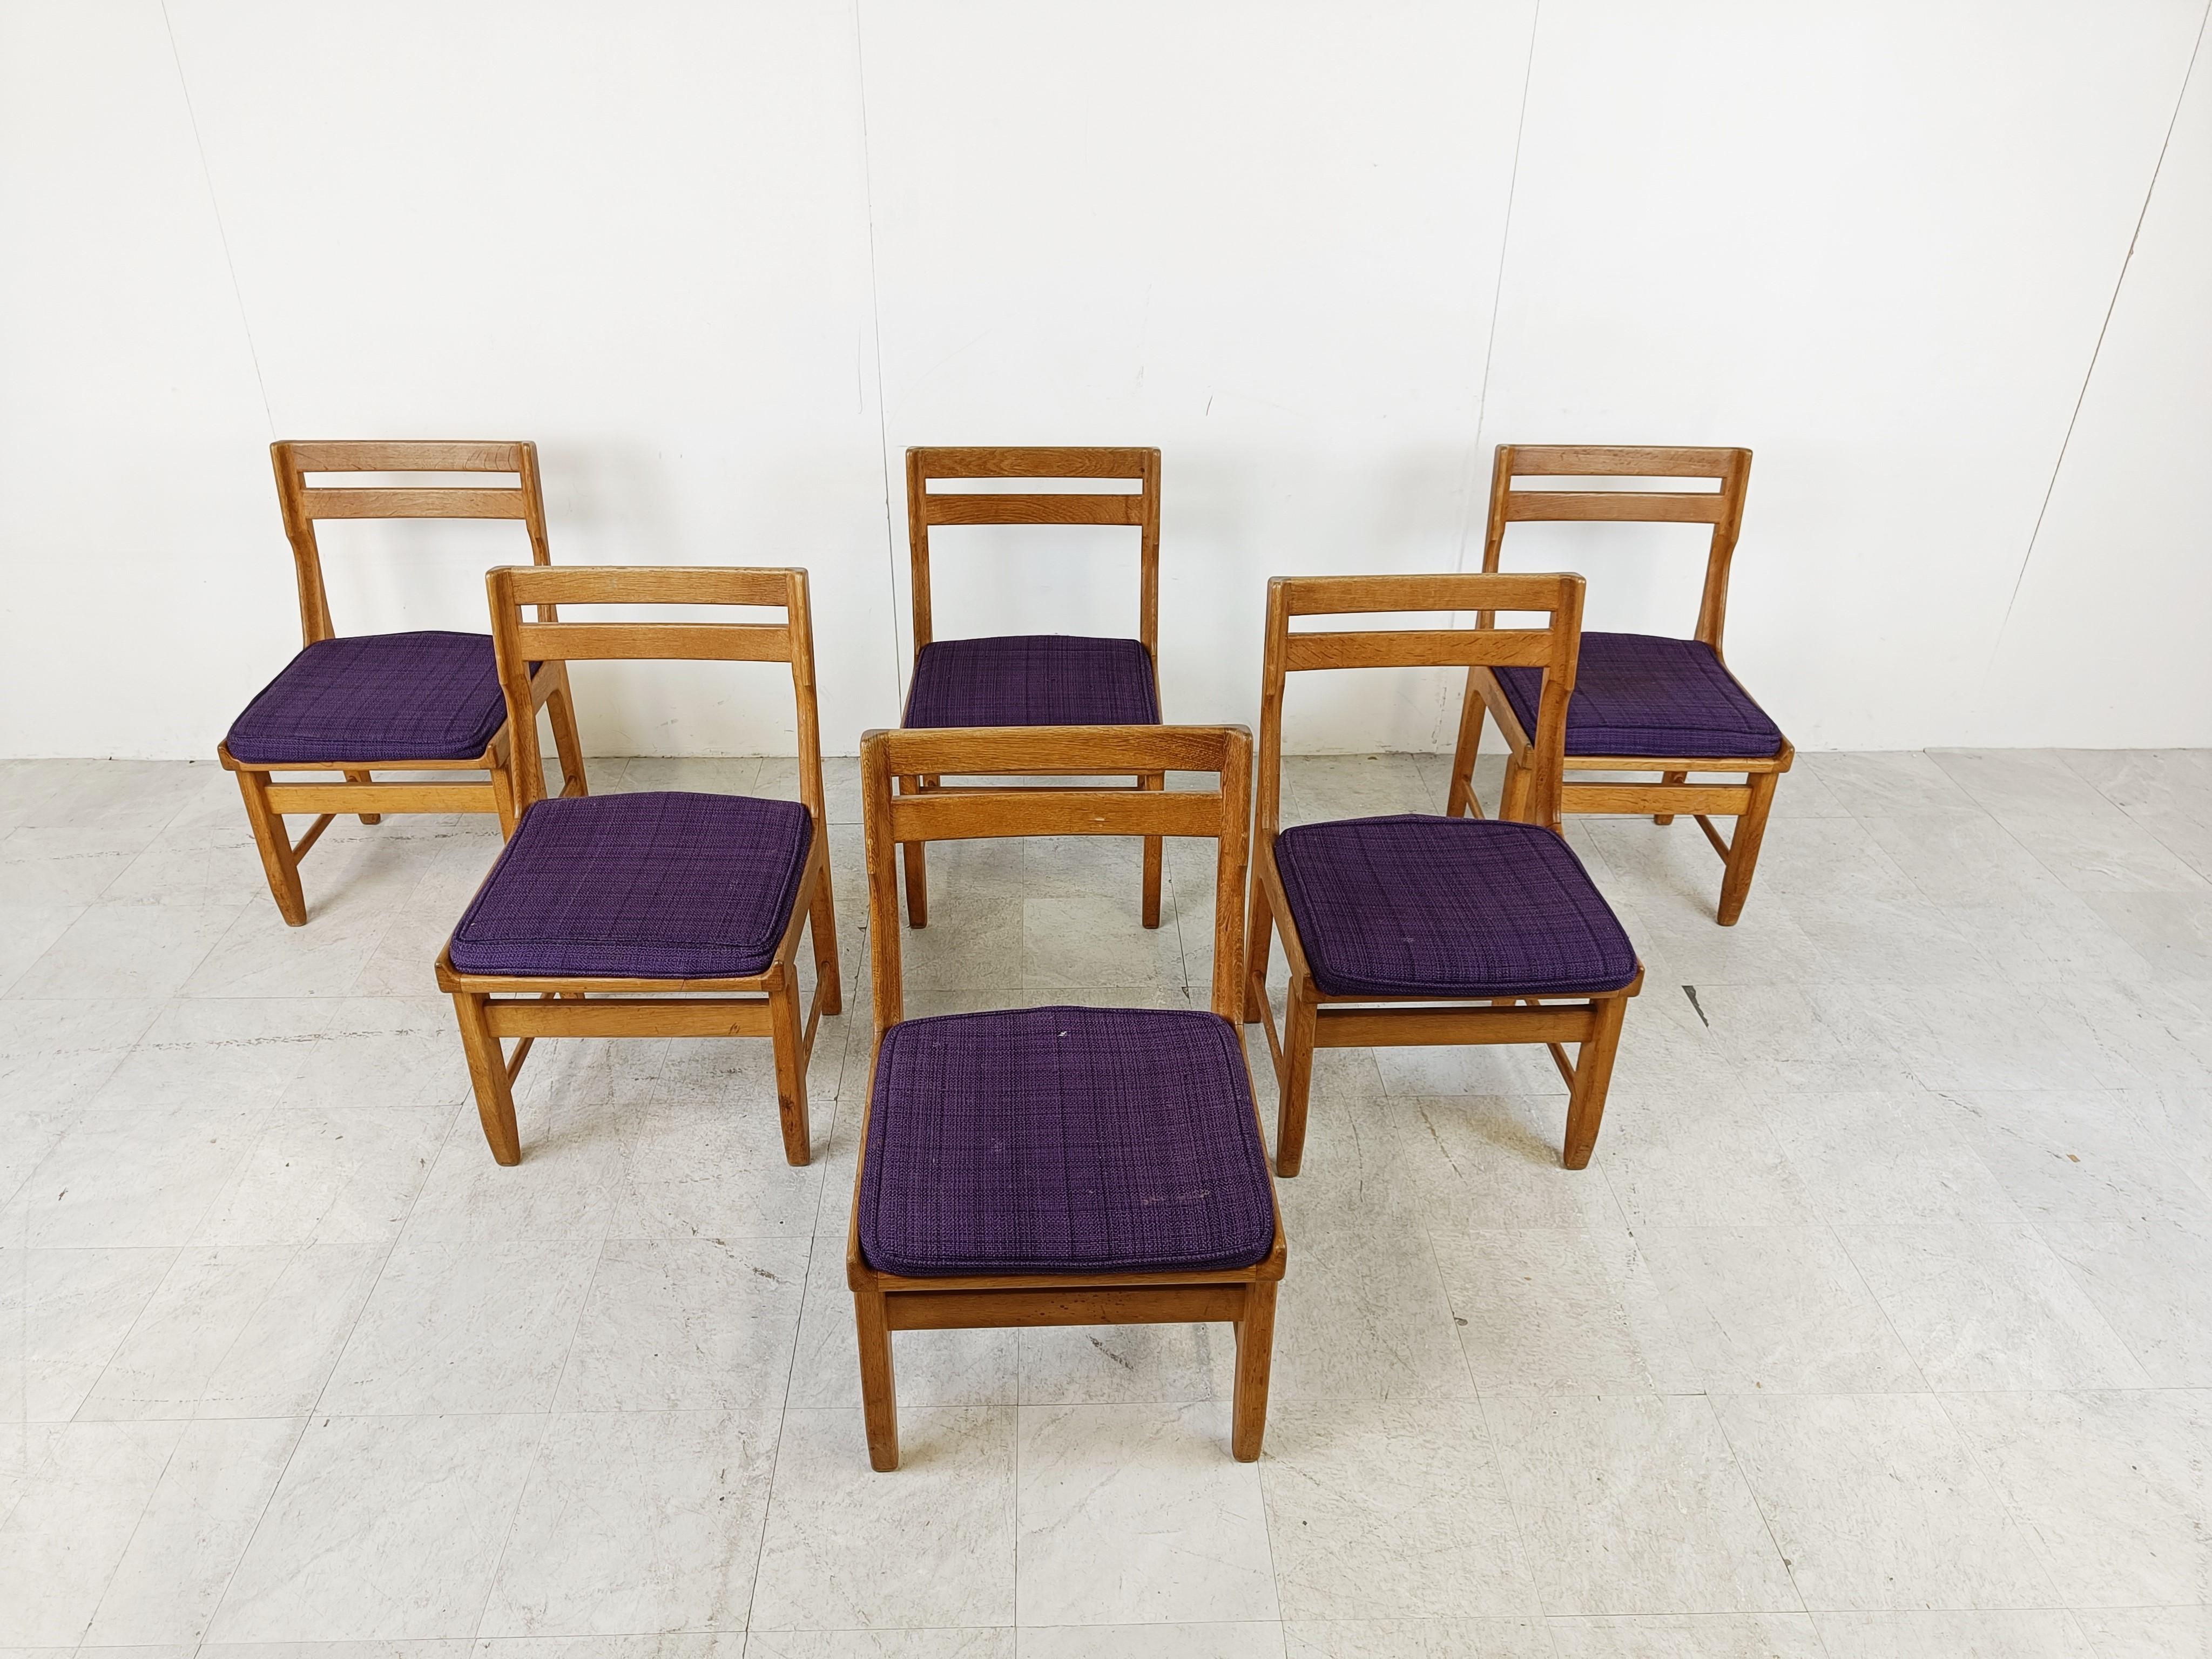 Solid oak dining chairs by Guillerme et Chambron for Votre Maison model Raphael.

Beautifully crafted chairs with curved elements.

Come with purple fabric seats.

The chairs are very sturdy and in good condition.

We can also offer